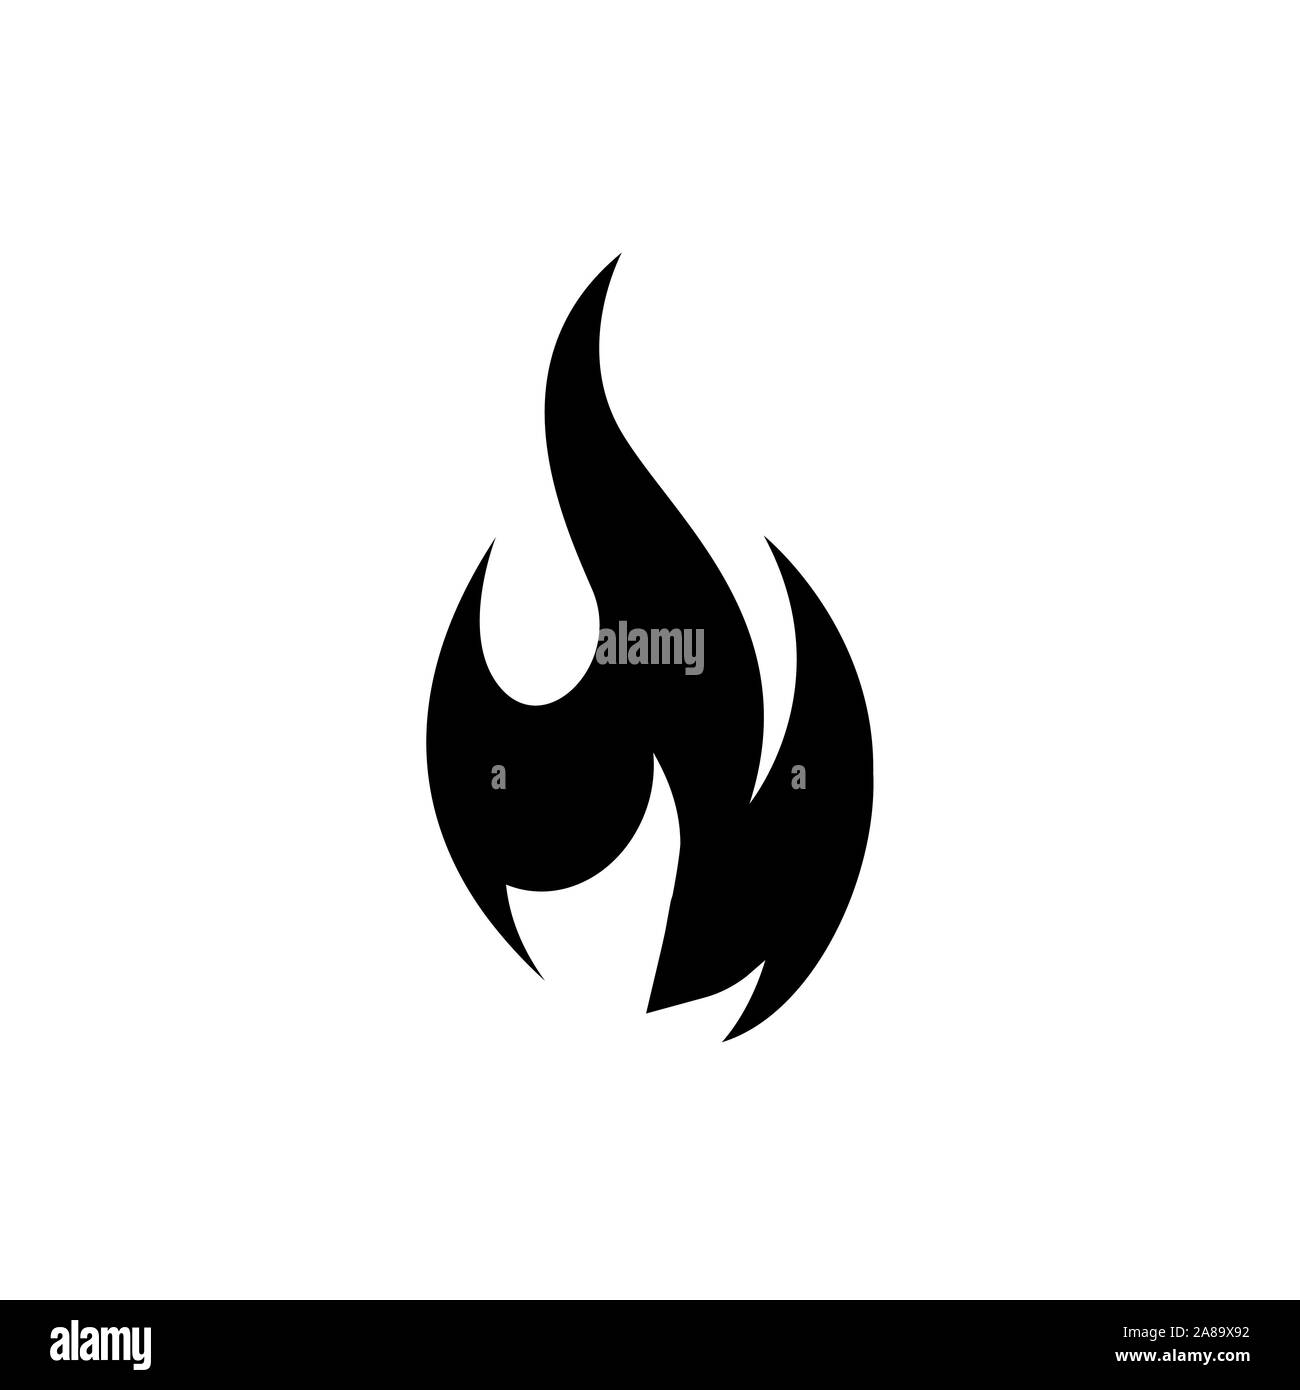 Fire icon black on white vector image. Fire flame icon, black icon isolated on white background Stock Vector